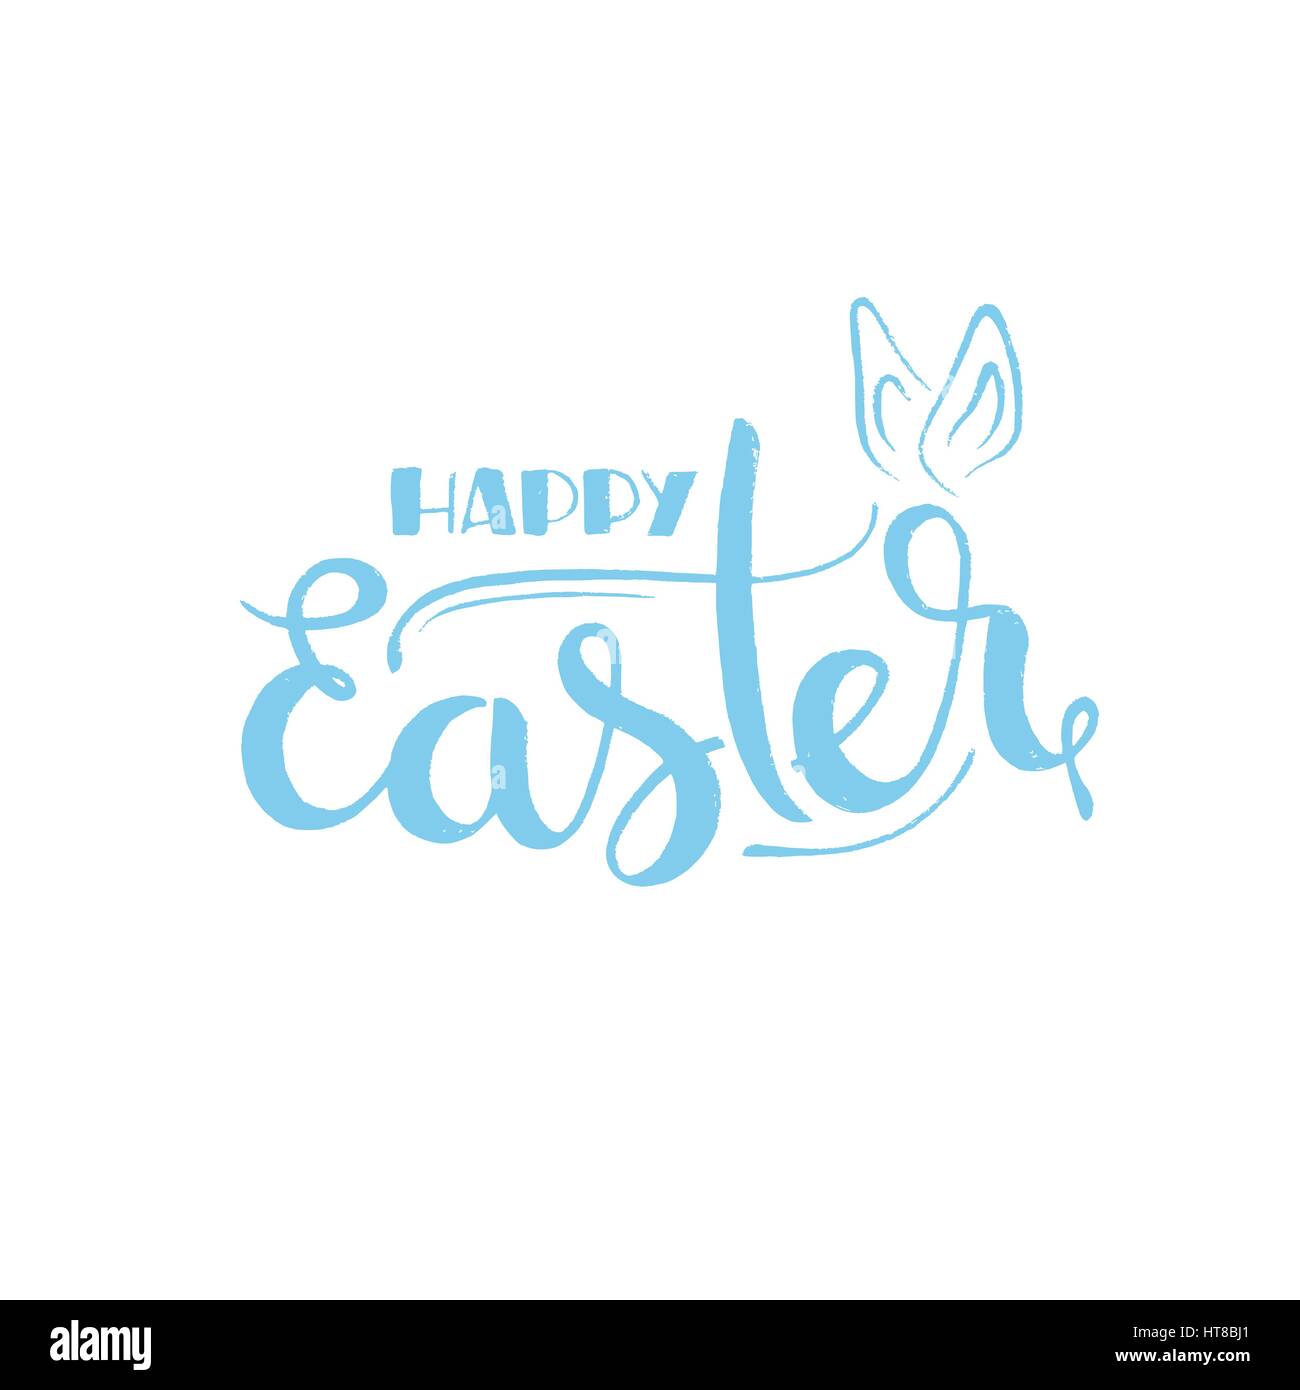 Happy Easter handwritten lettering. Modern vector hand drawn calligraphy with rabbit ears isolated on white background for your design Stock Vector